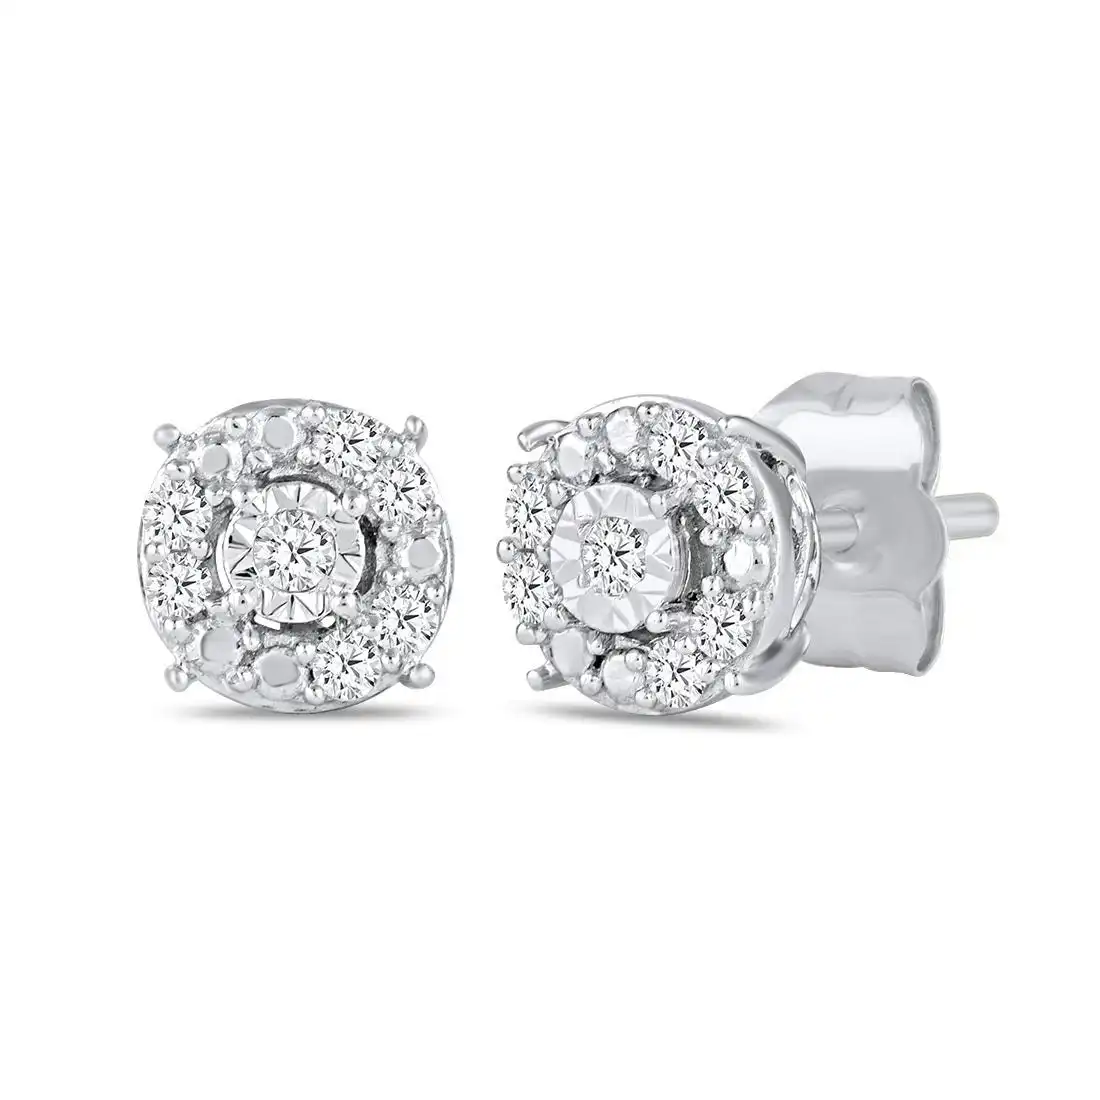 Tia Brilliant Miracle Stud Earrings with 0.10ct of Diamonds in 9ct White Gold